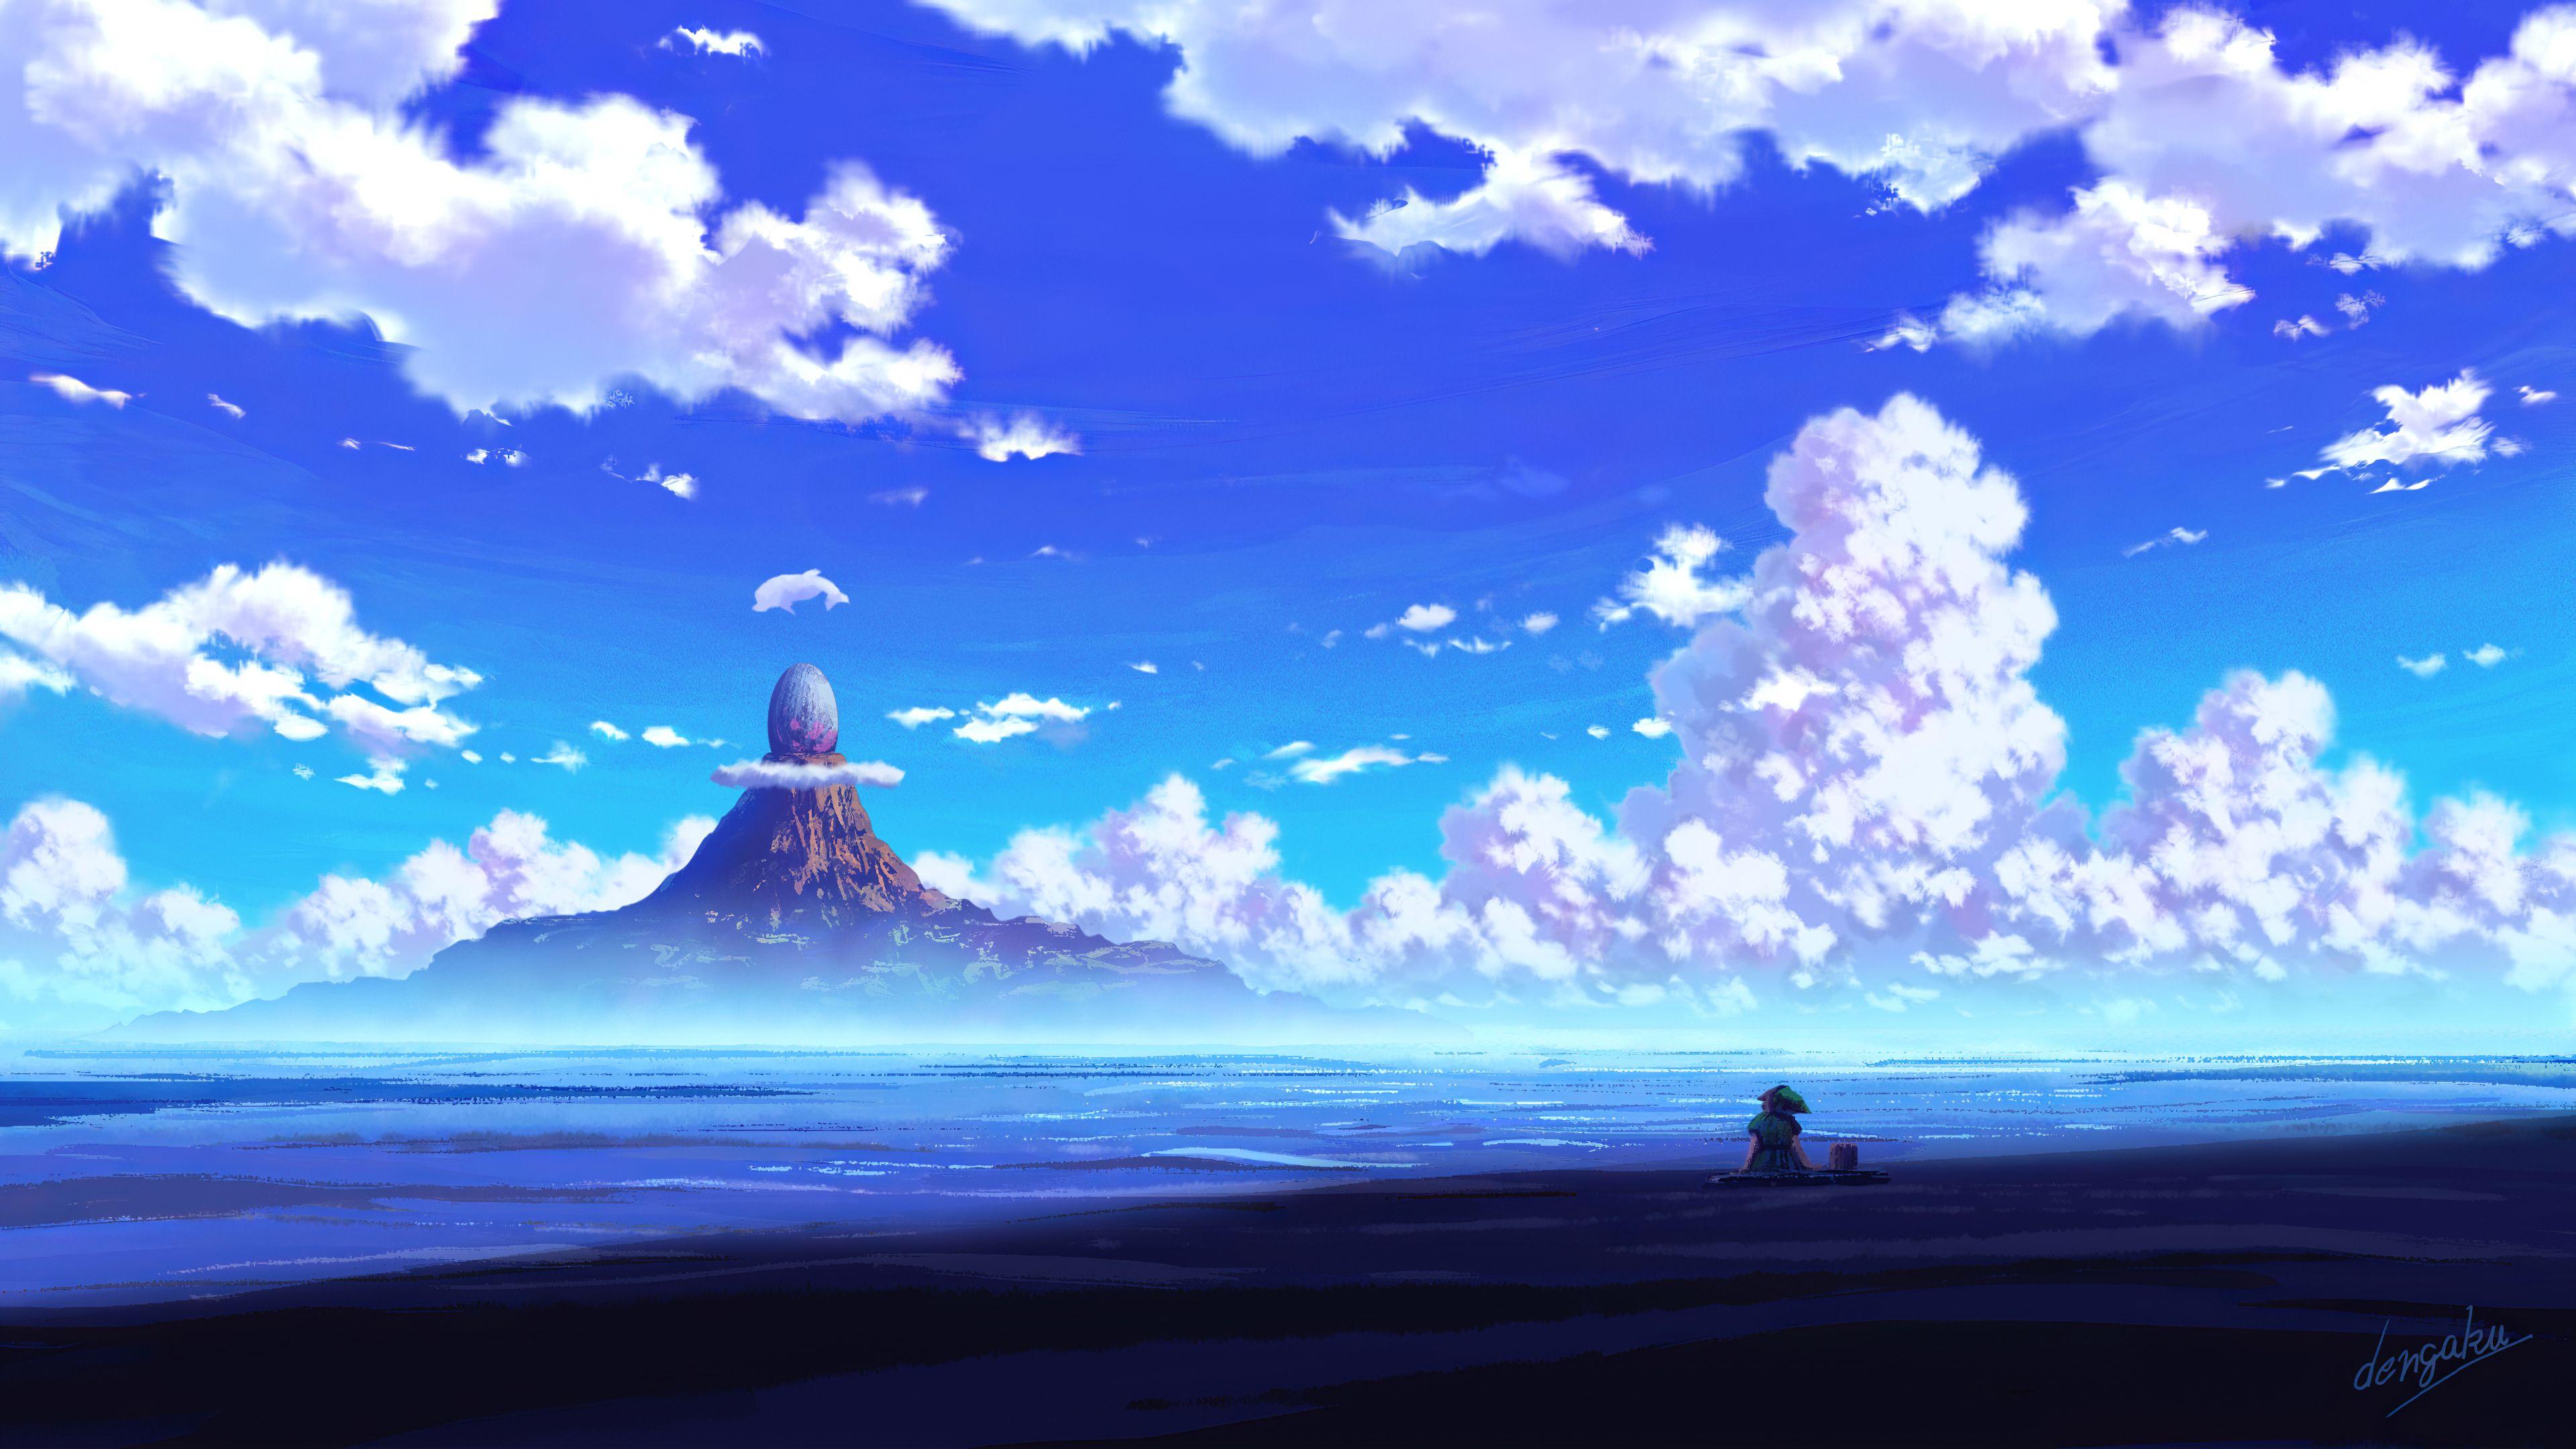 4k Anime Scenery Wallpapers - Top Free 4k Anime Scenery Backgrounds